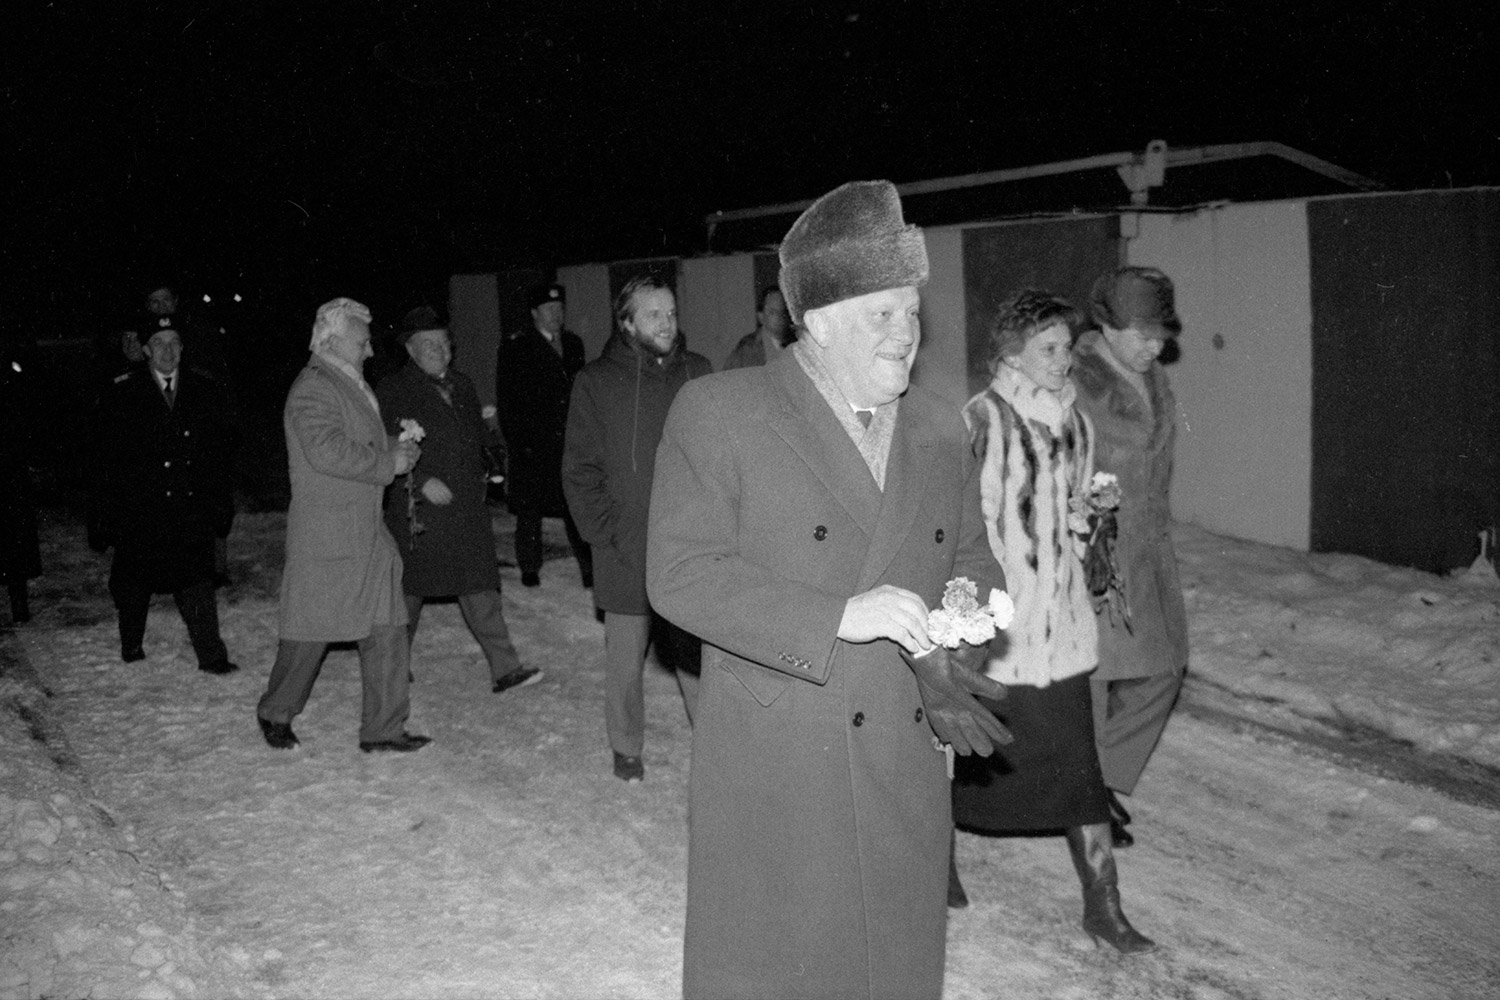 Meeting of Lithuanian deputies who returned from Moscow at Vilnius Airport. At the front: Algirdas Mykolas Brazauskas, First Secretary of the Central Committee of Communist Party of Lithuania; followed by: Juozas Olekas, Member of the Seimas of the Sąjūdis of Lithuania. LVCA, photographer: P. Lileikis.